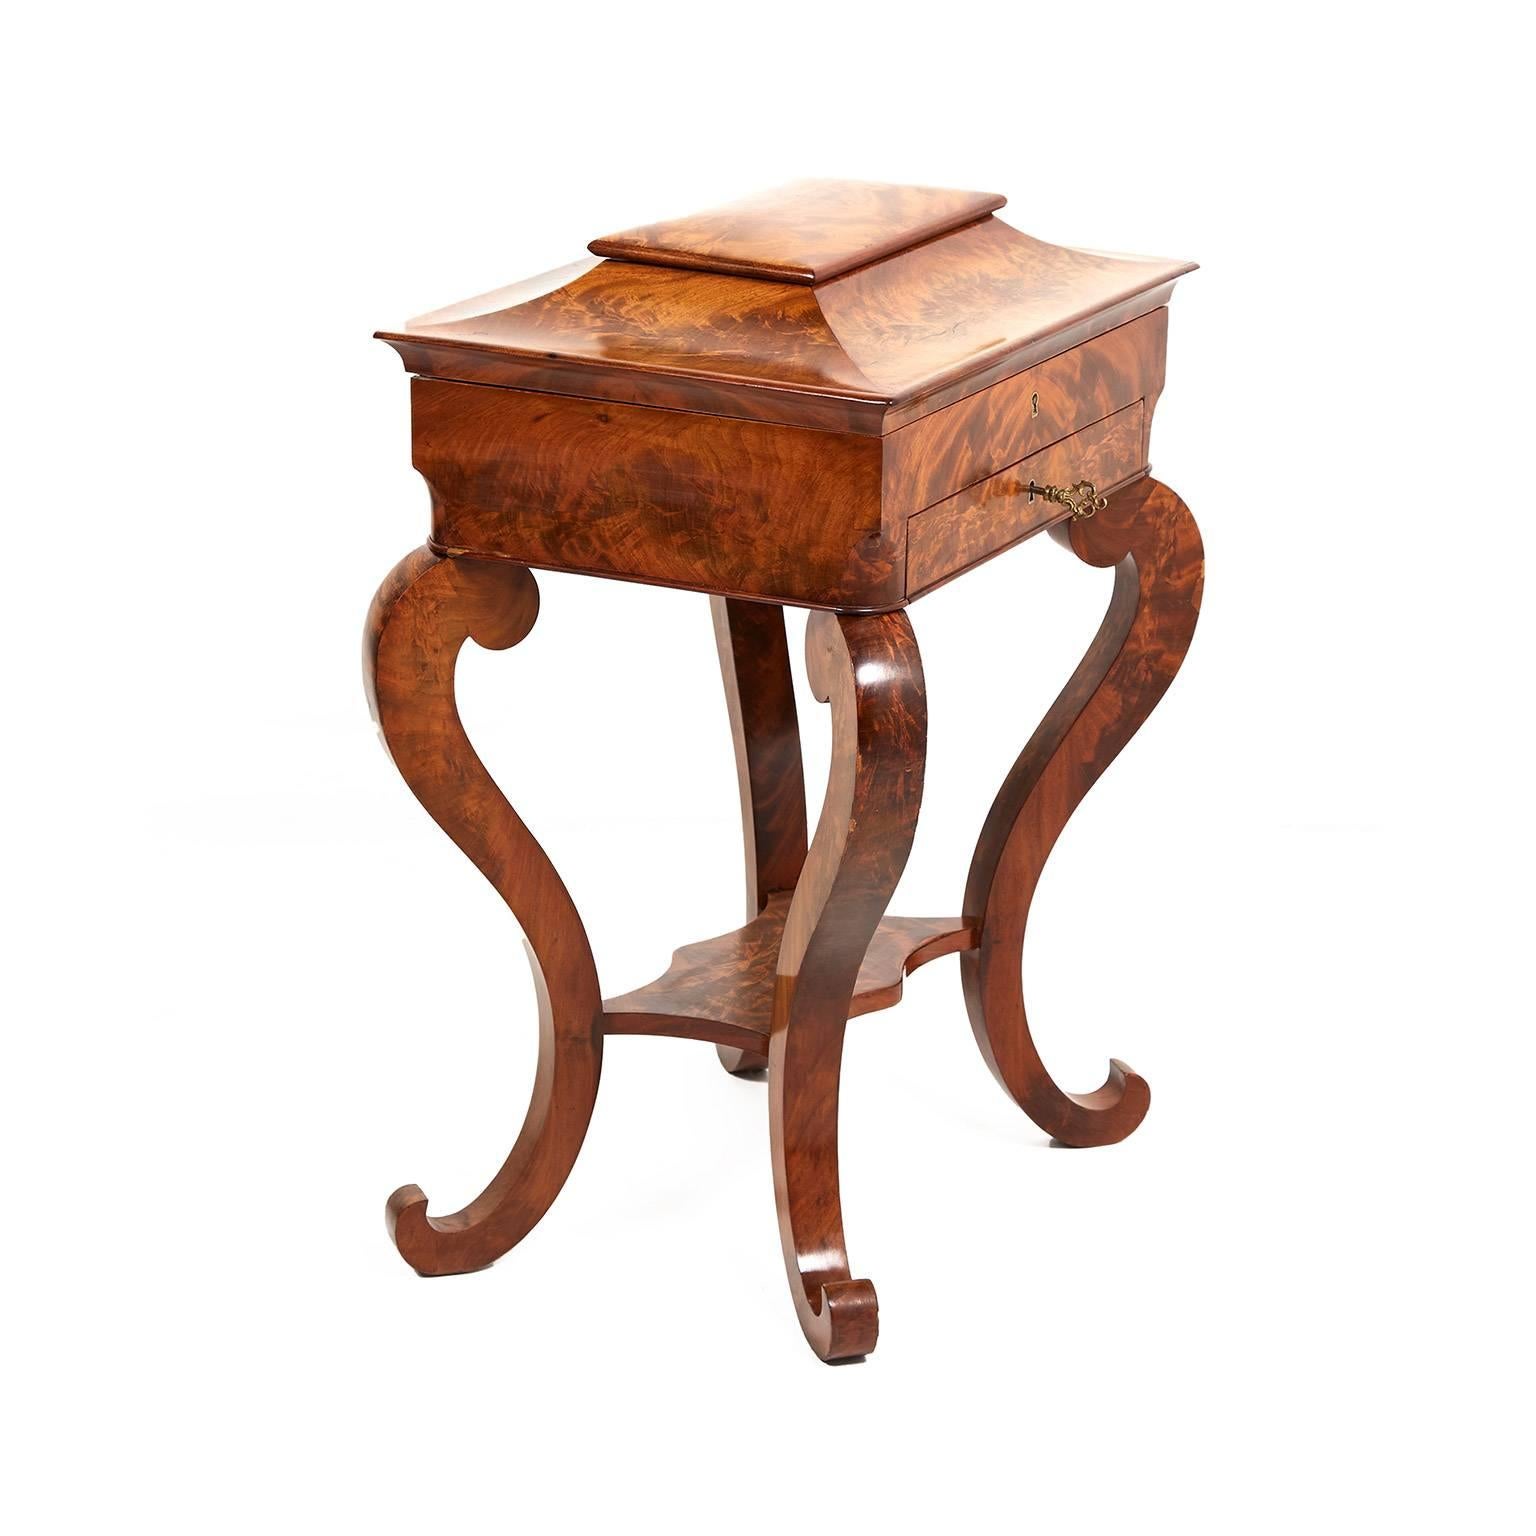 Antique French, Empire-style , lady’s work table or vanity. With satin birch interior, and a mirror, a single drawer and a lidded top compartment. An unusual and attractive style to this piece, circa 1850. Its small size makes it ideal for any